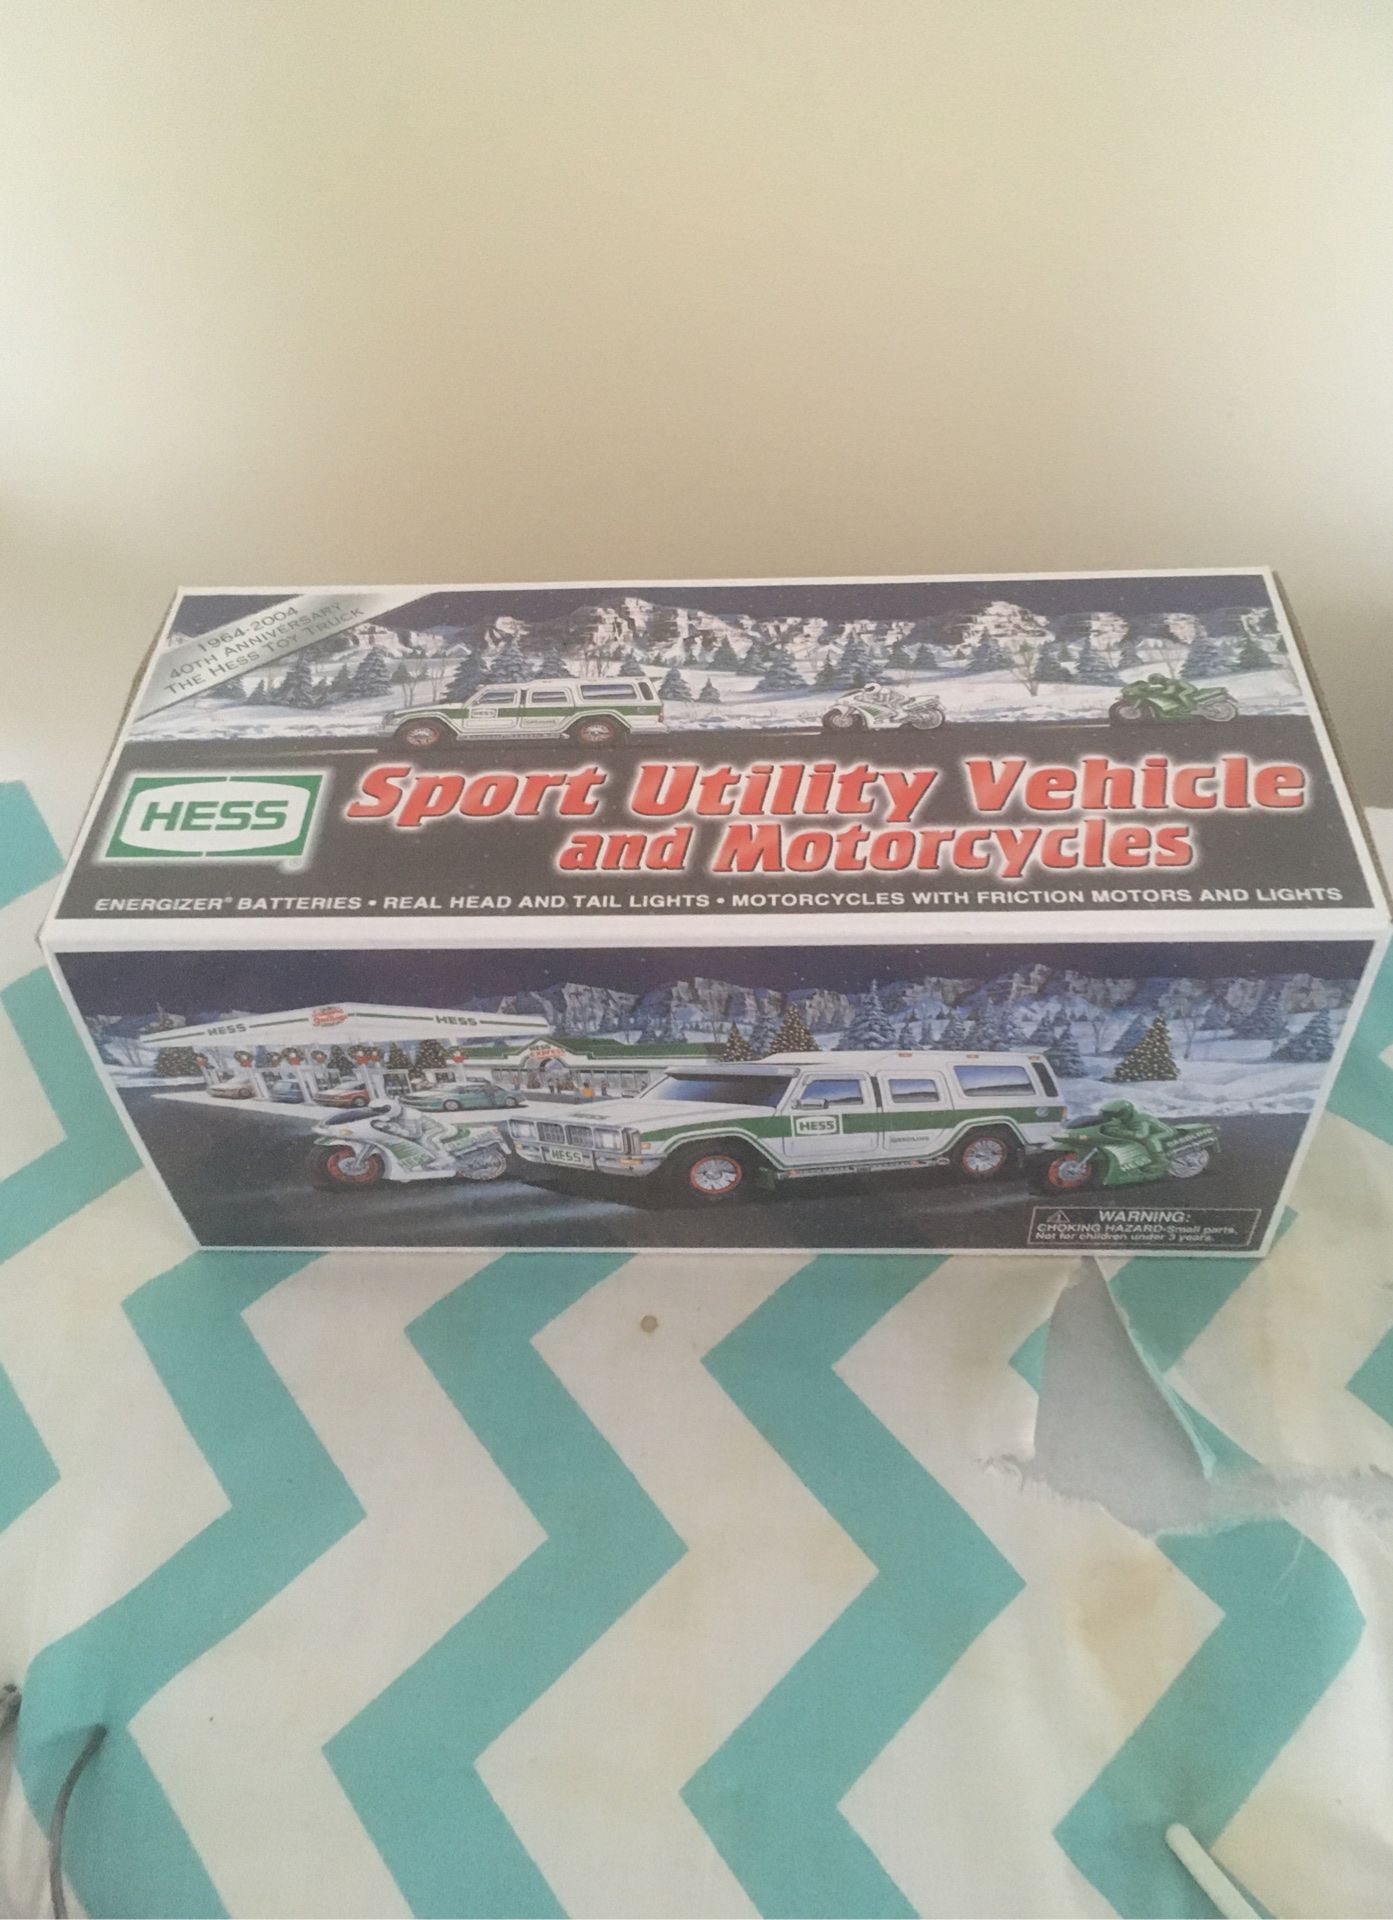 2004 Hess SUV and motorcycles. New in box. Never used